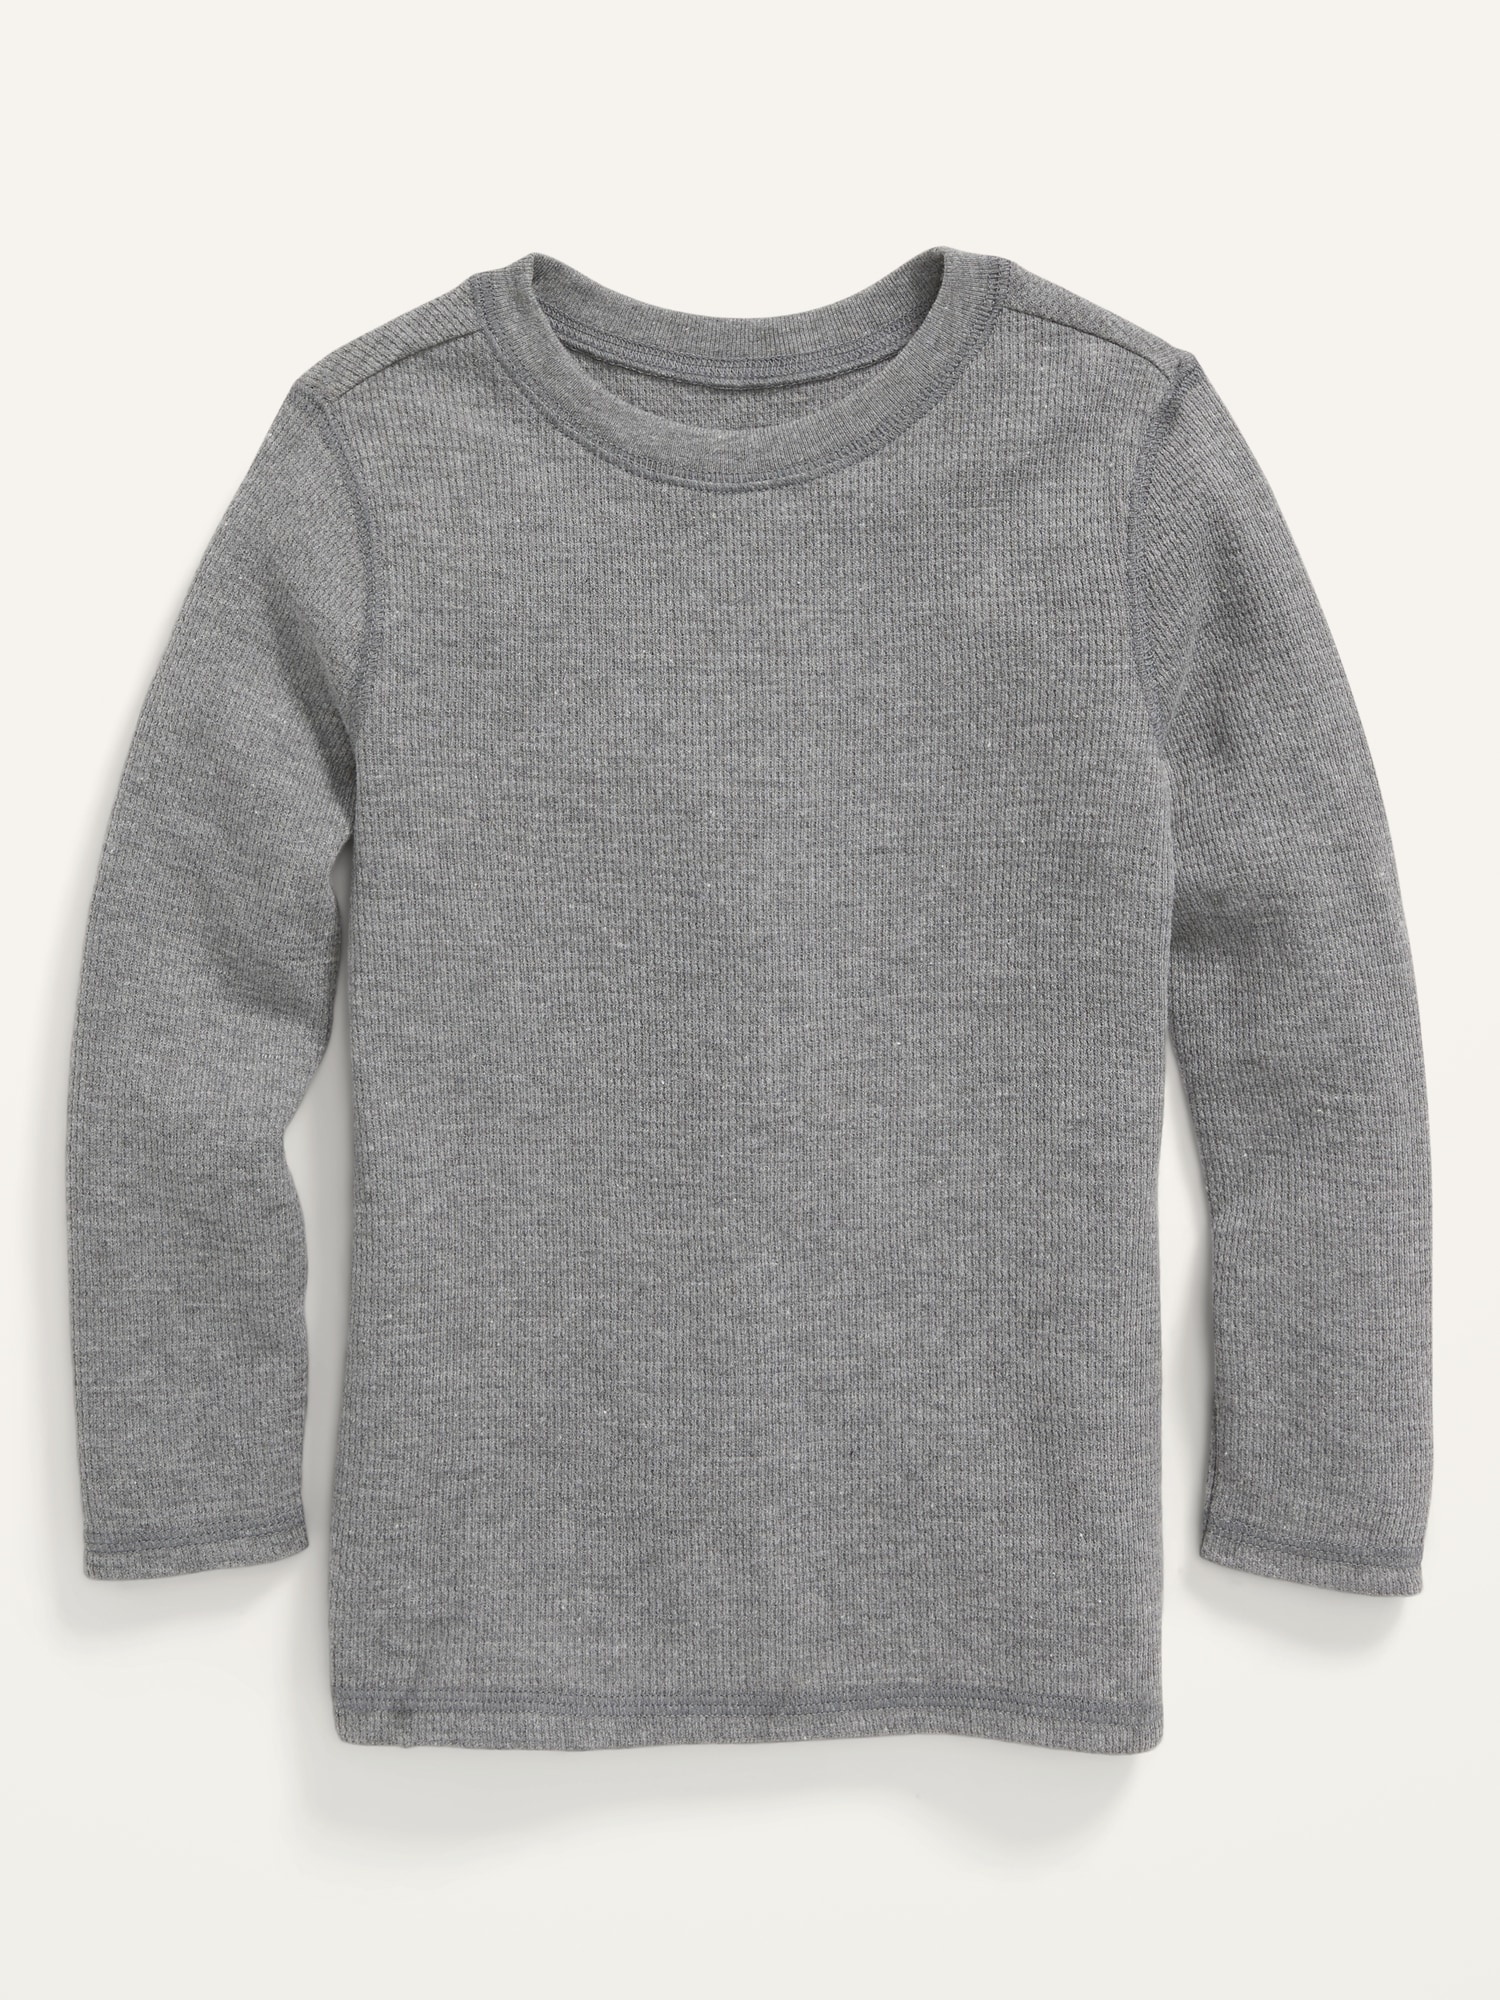 Thermal-Knit Unisex Long-Sleeve T-Shirt for Toddlers | Old Navy